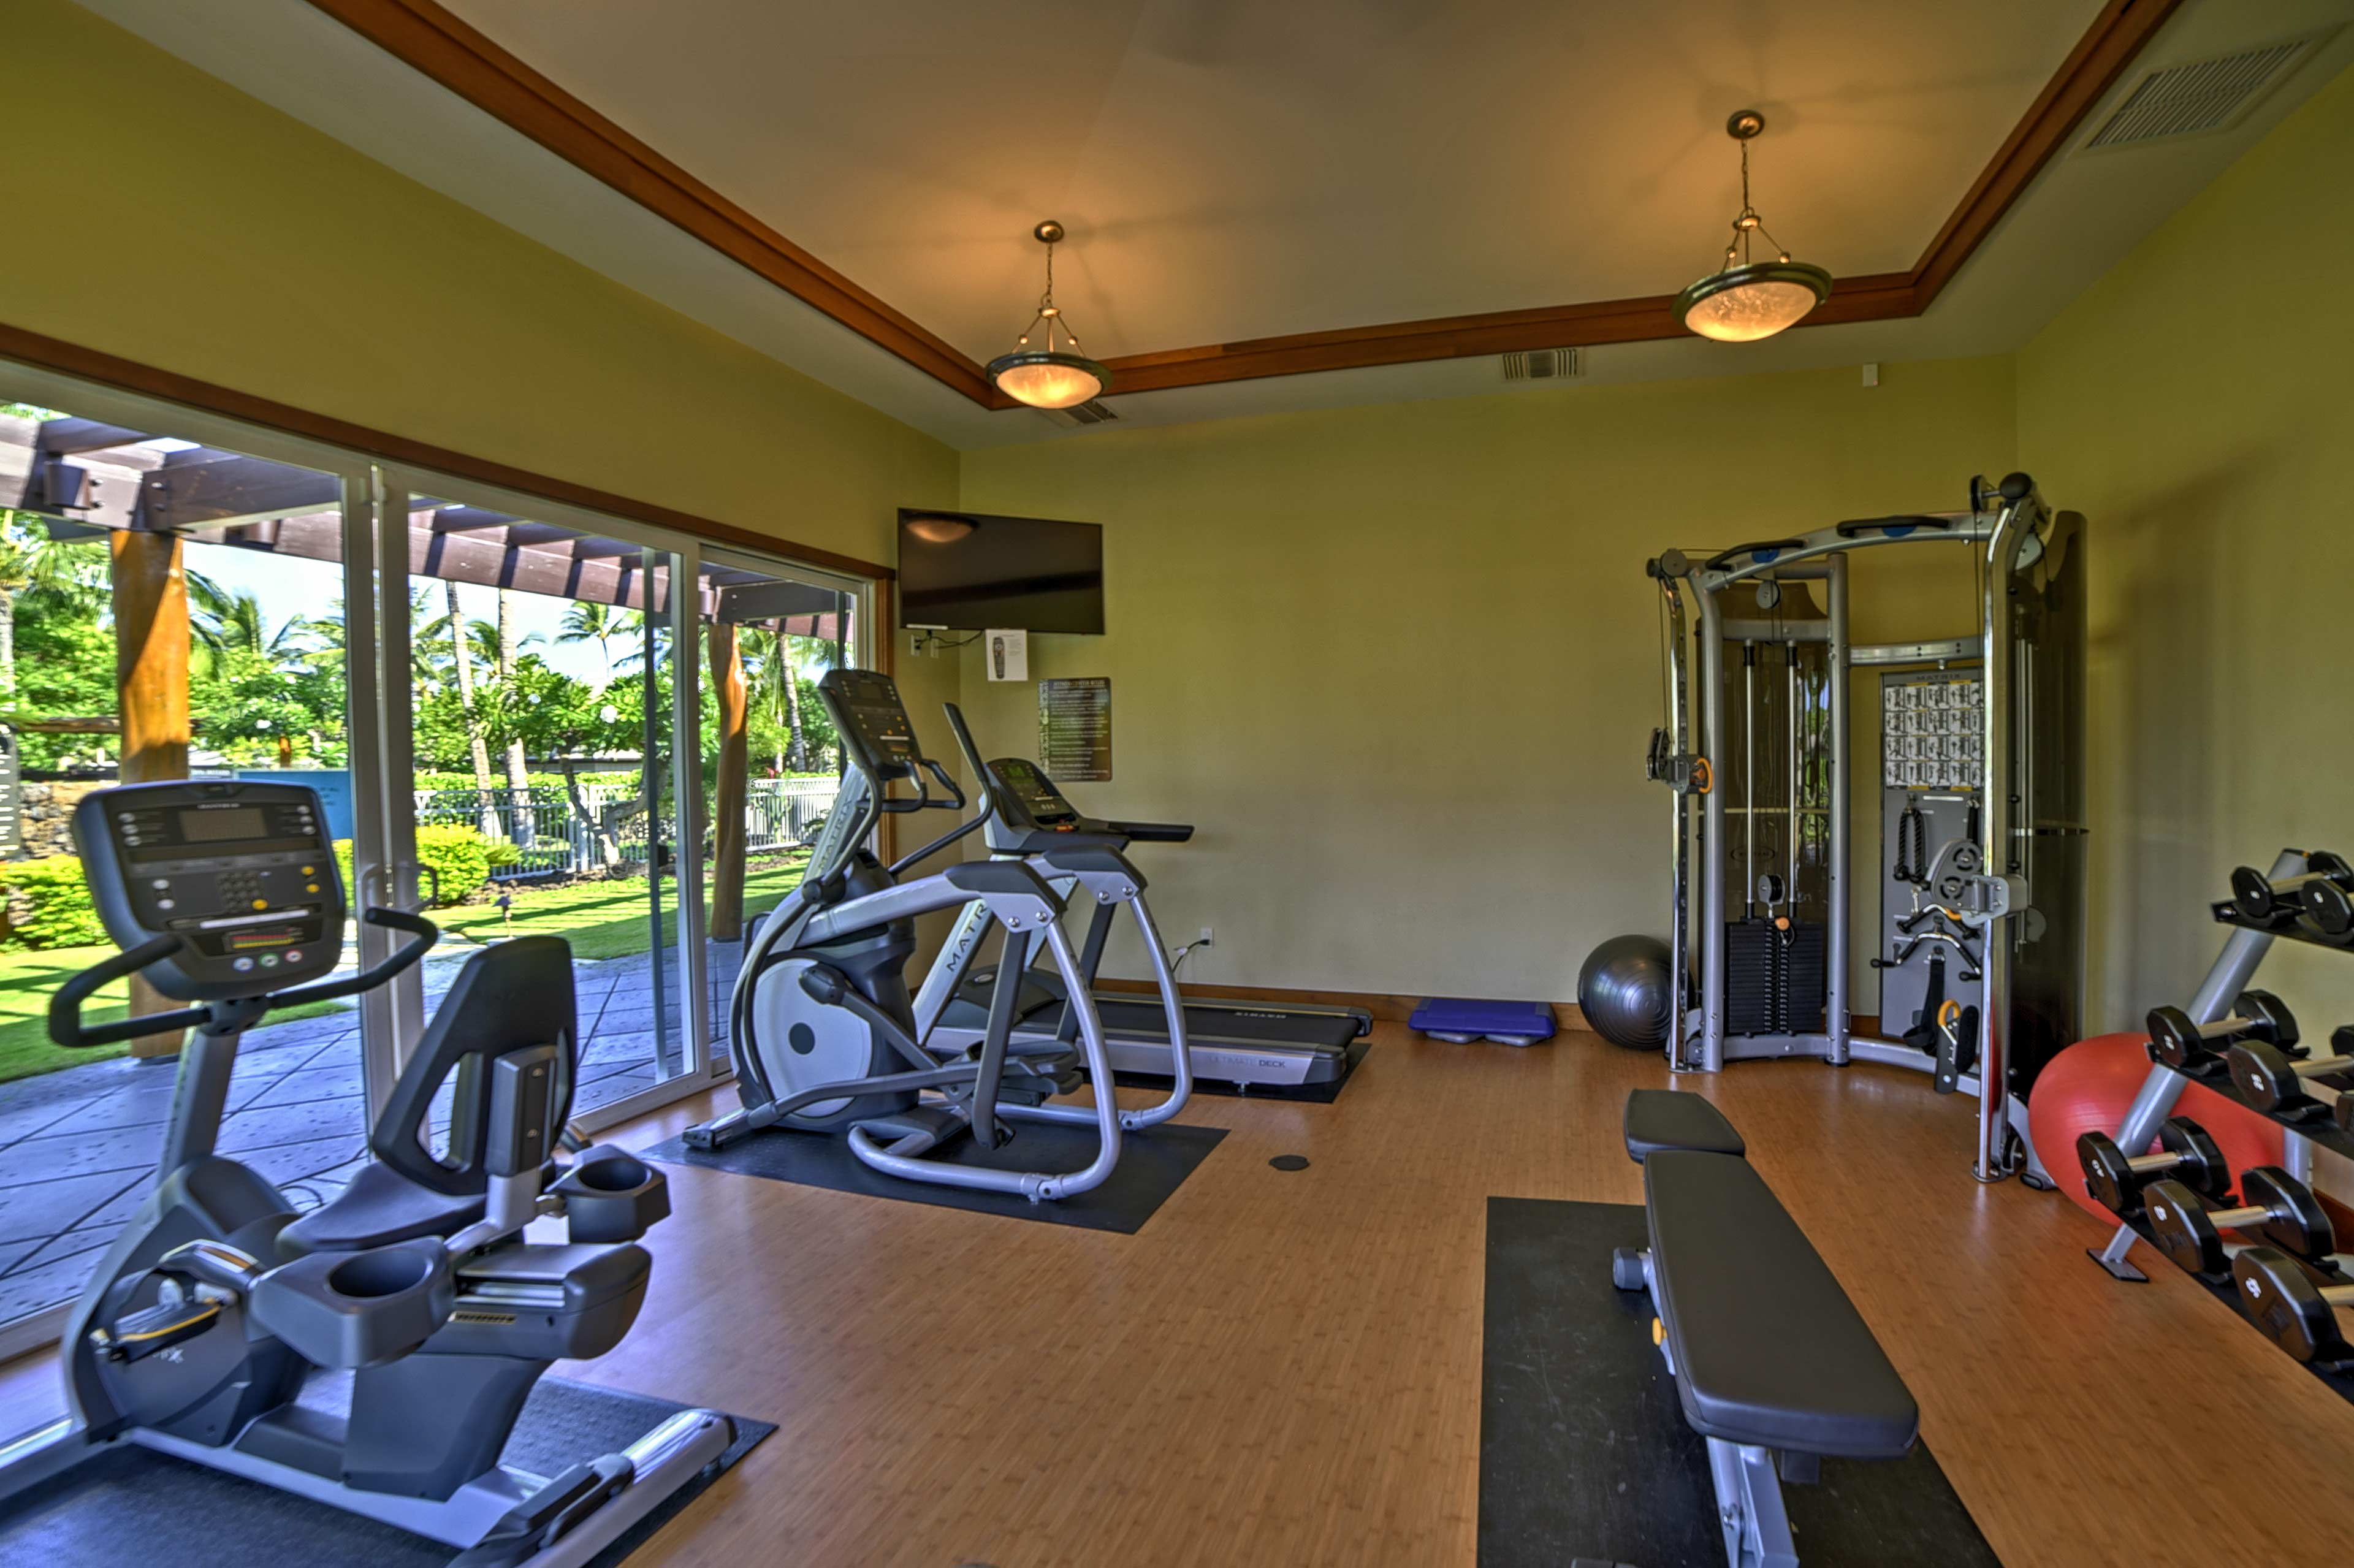 Get in your daily cardio in the state-of-the-art fitness center.